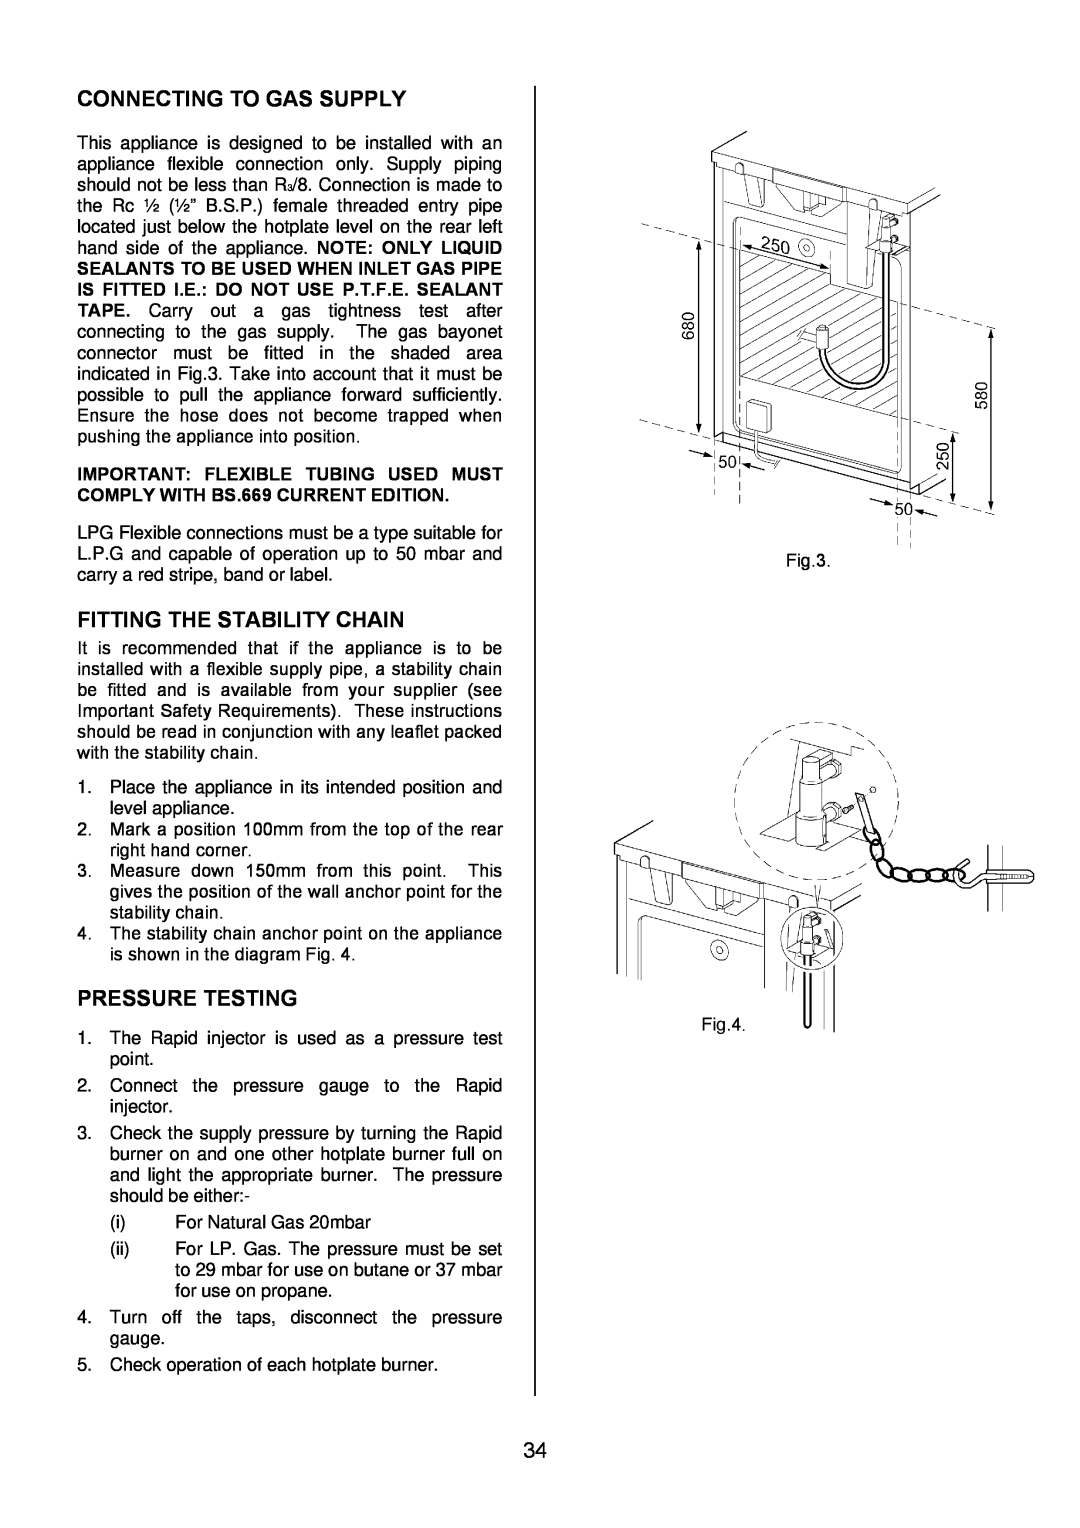 Electrolux EKG6046/EKG6047 manual Connecting To Gas Supply, Fitting The Stability Chain, Pressure Testing 